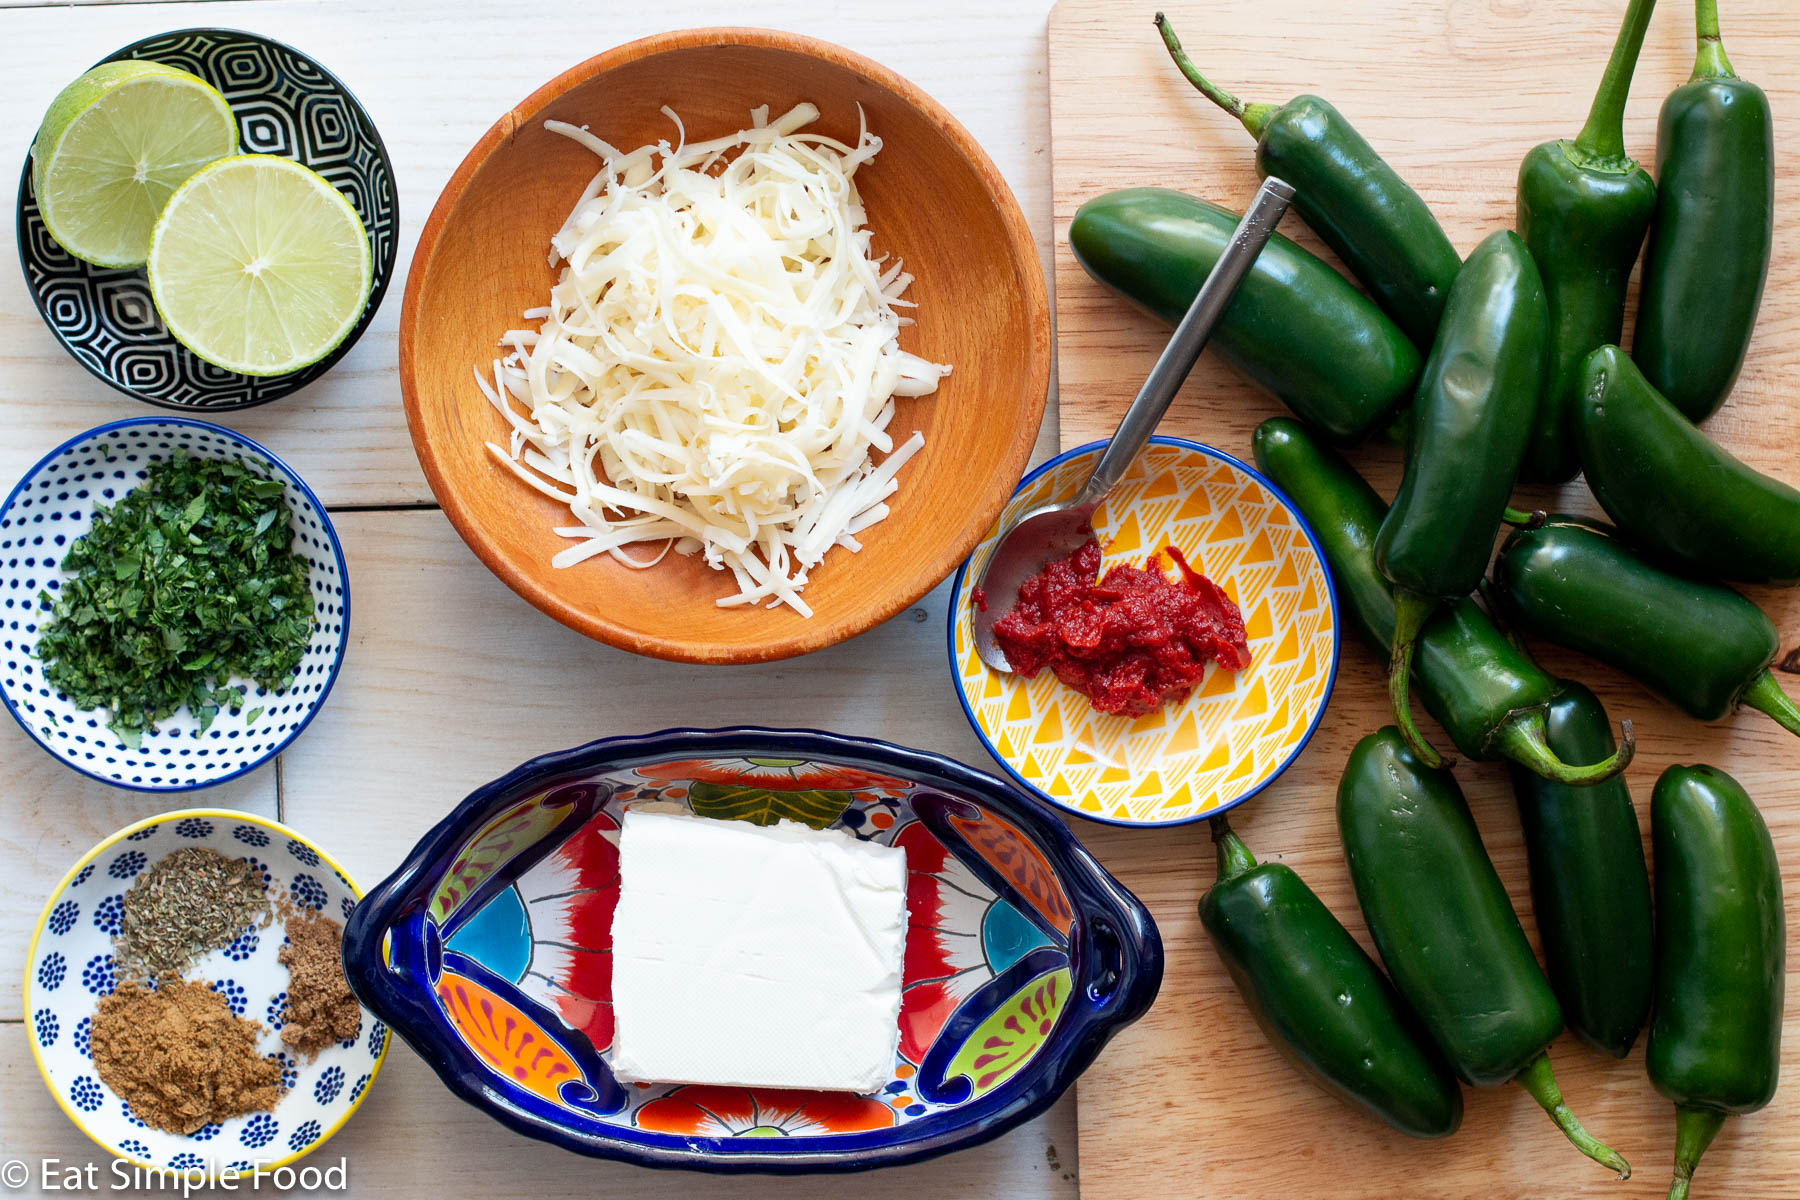 Top view of ingredients: containers each of cream cheese block, spices, tomato paste with spoon, grated white cheese, chopped cilantro, 2 lime halves, and 12 whole jalapenos.